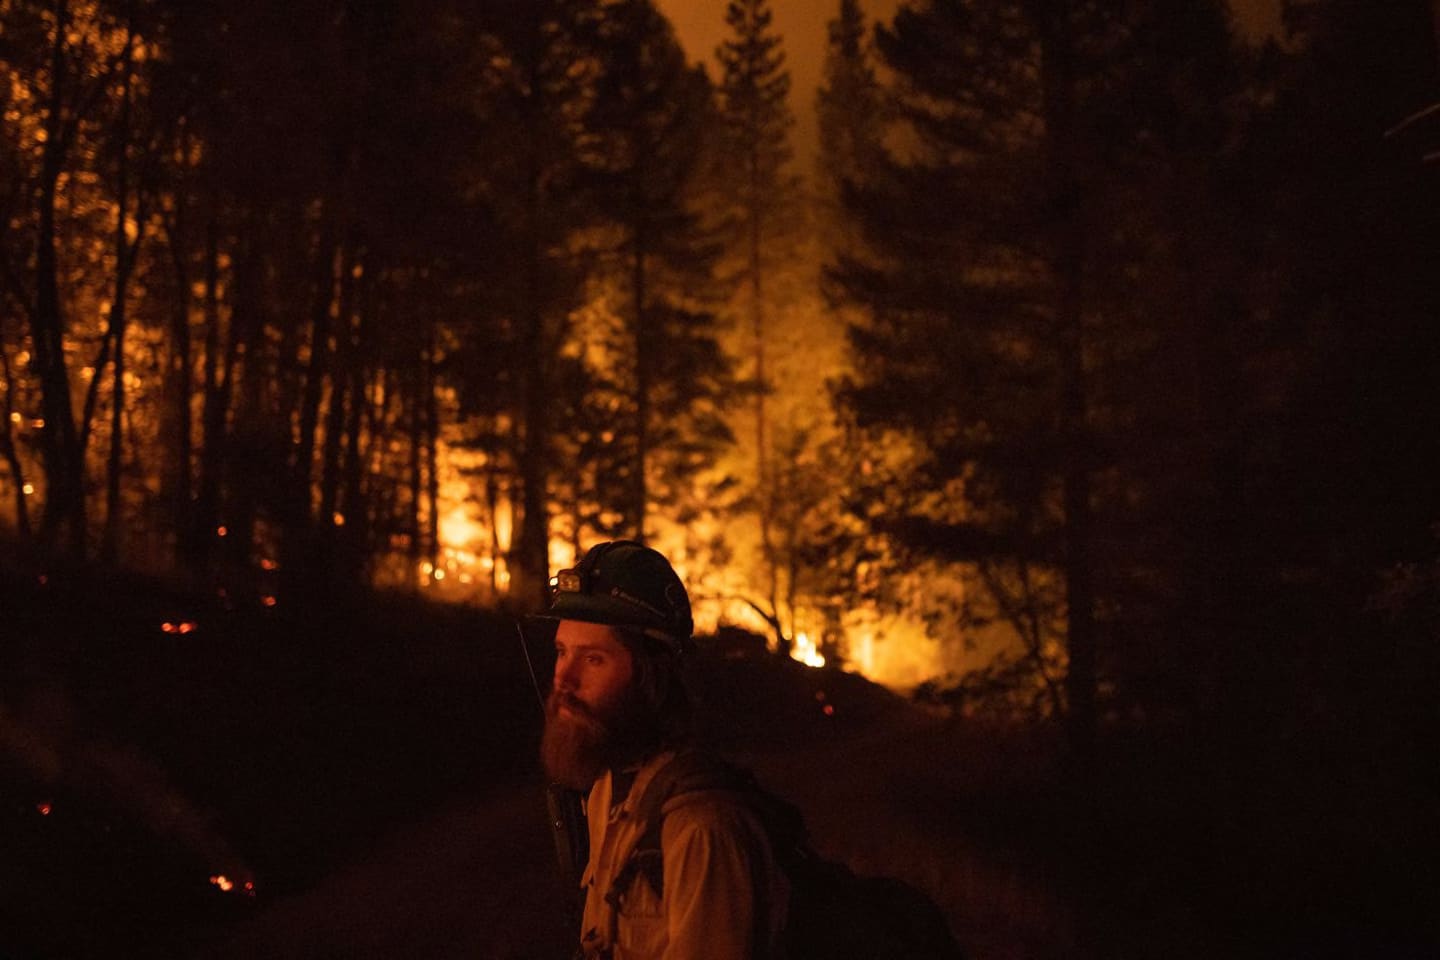 A firefighter with the Tallac Hotshots, fighting the Dixie Fire, made sure a controlled burn did not leave the lines of containment in Genesee, Calif. early Friday. Many of the biggest blazes around California were still much less than 50 percent contained as of Friday morning.